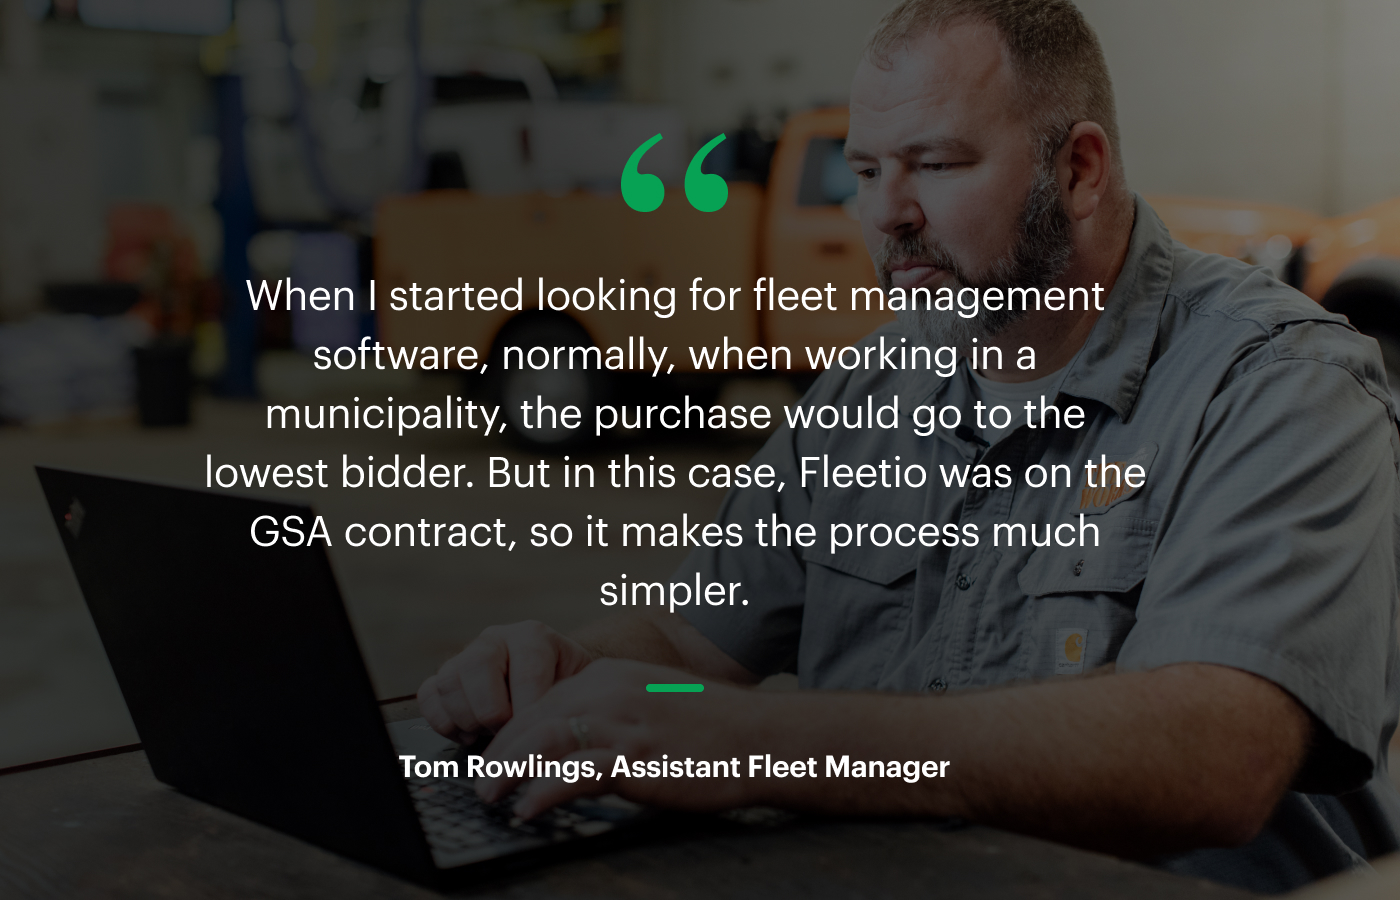 “When I started looking for fleet management software, normally, when working in a municipality, the purchase would go to the lowest bidder. But in this case, Fleetio was on the GSA contract, so it makes the process much simpler.” – Tom Rowlings, Assistant Fleet Manager